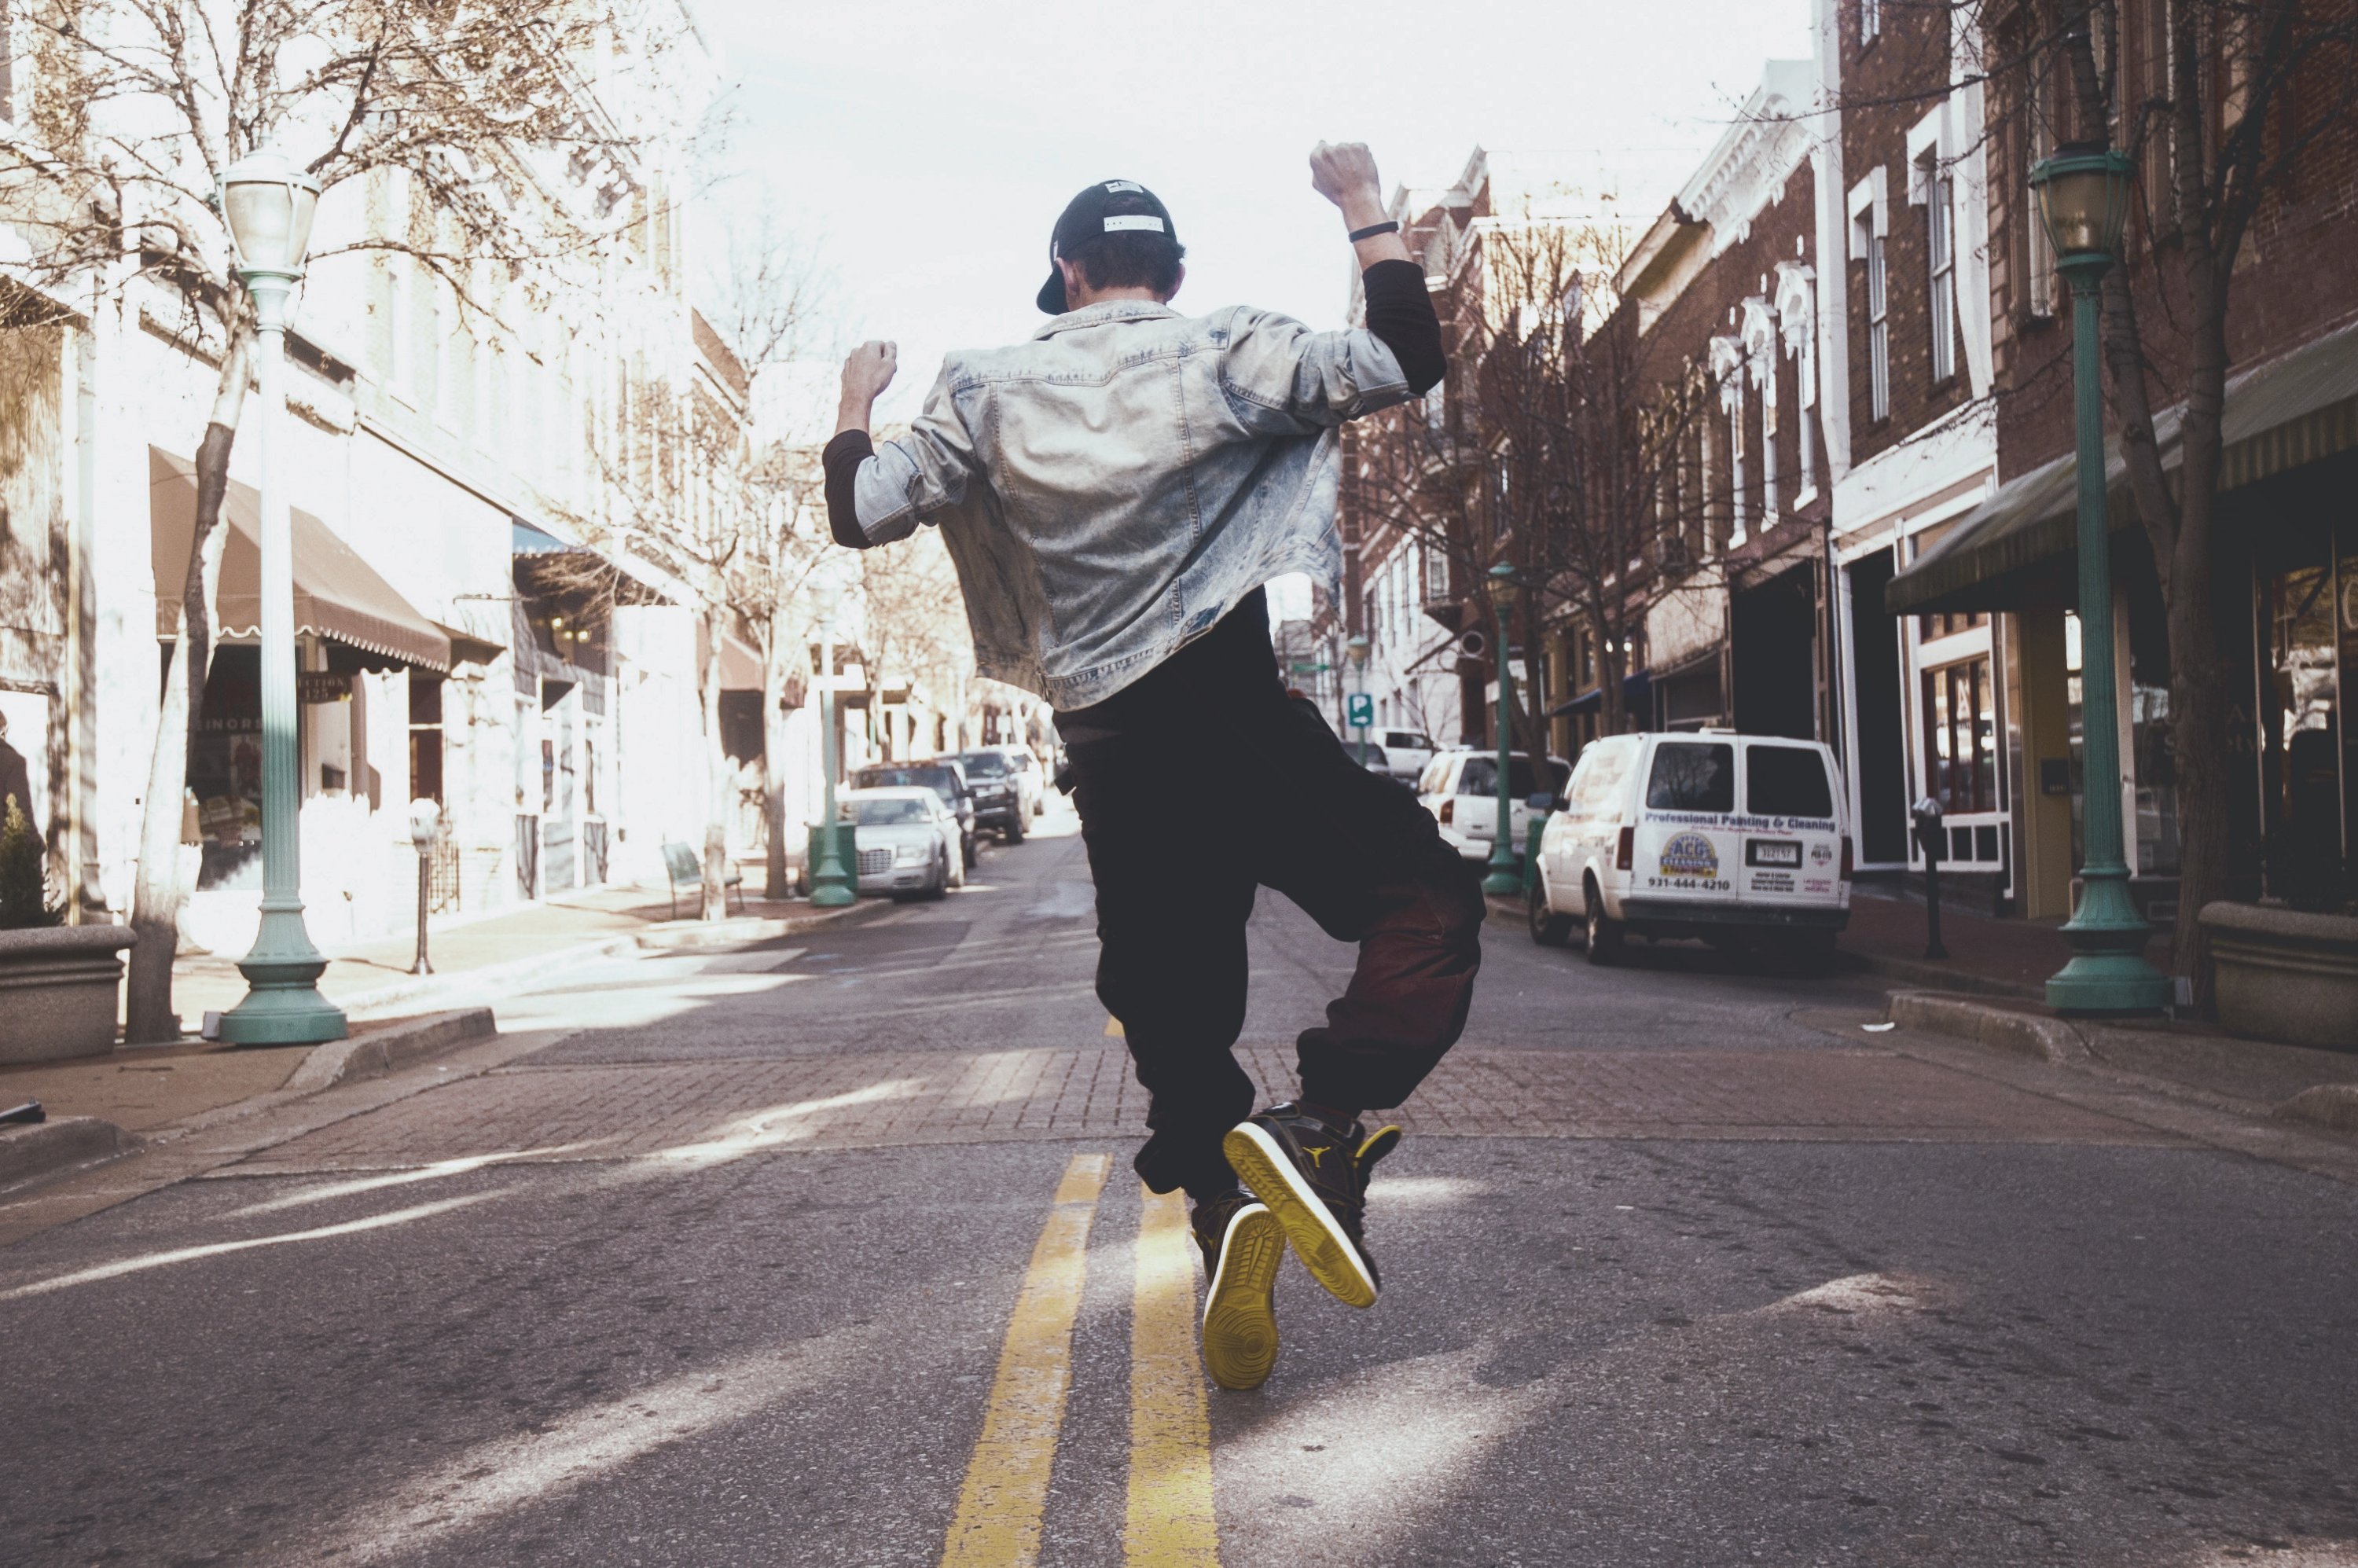 Man in street jumping with joy/ dancing